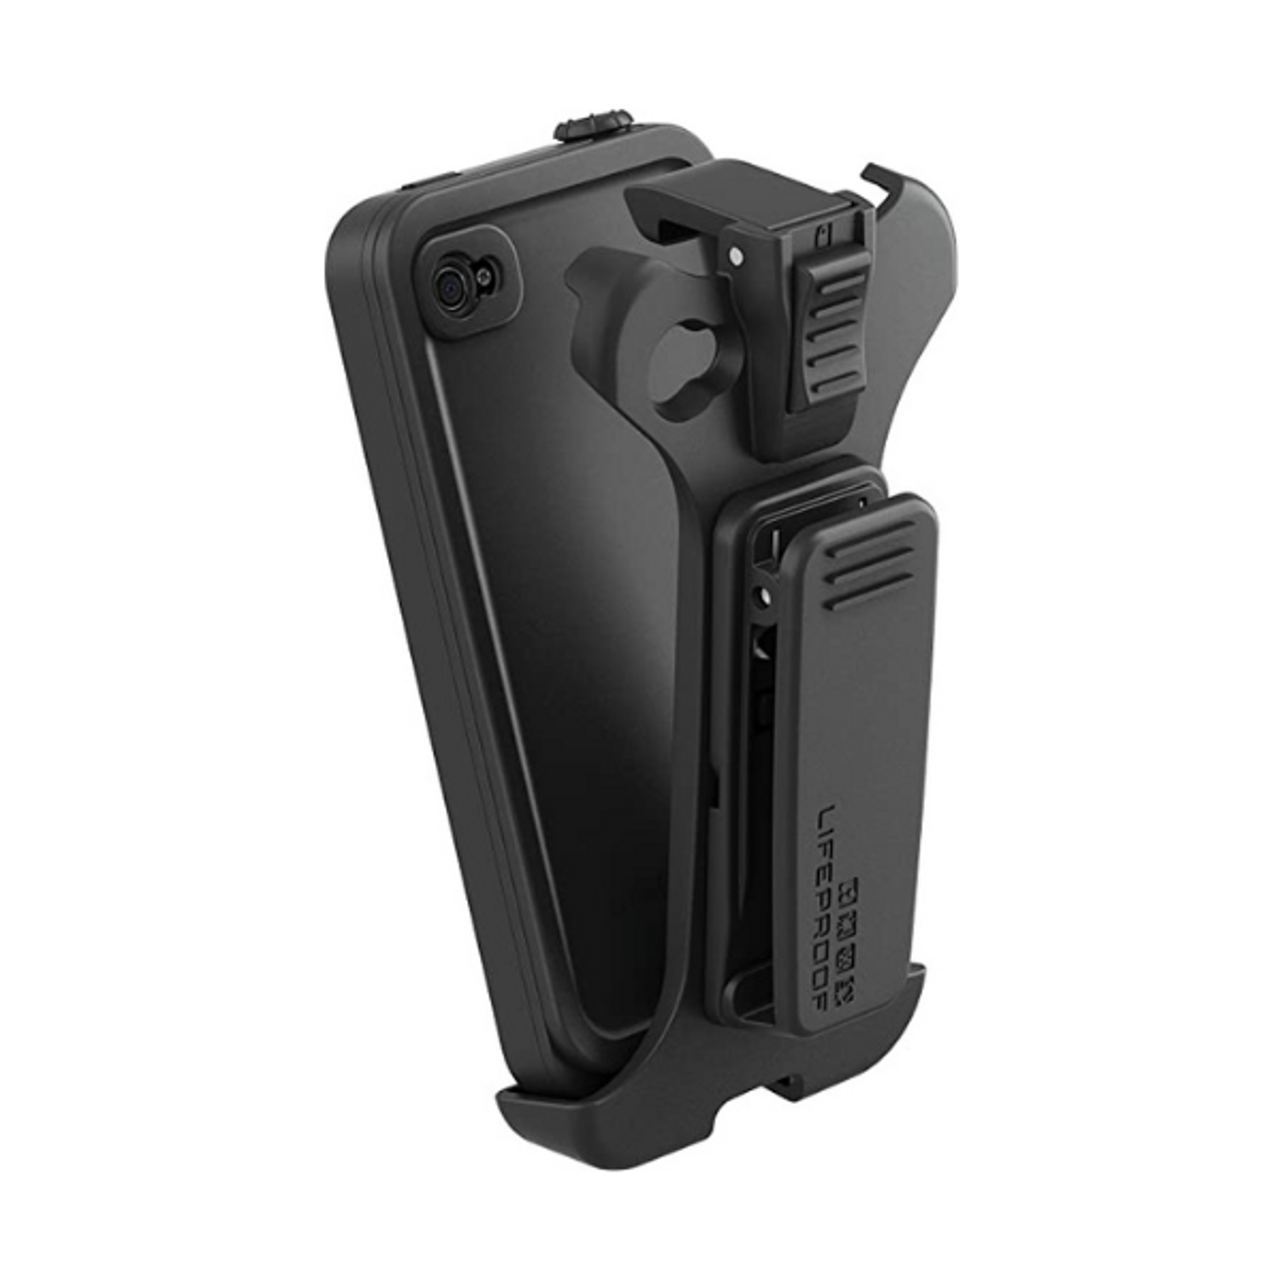 LifeProof Replacement Belt Clip for iPhone 4S - Black product image